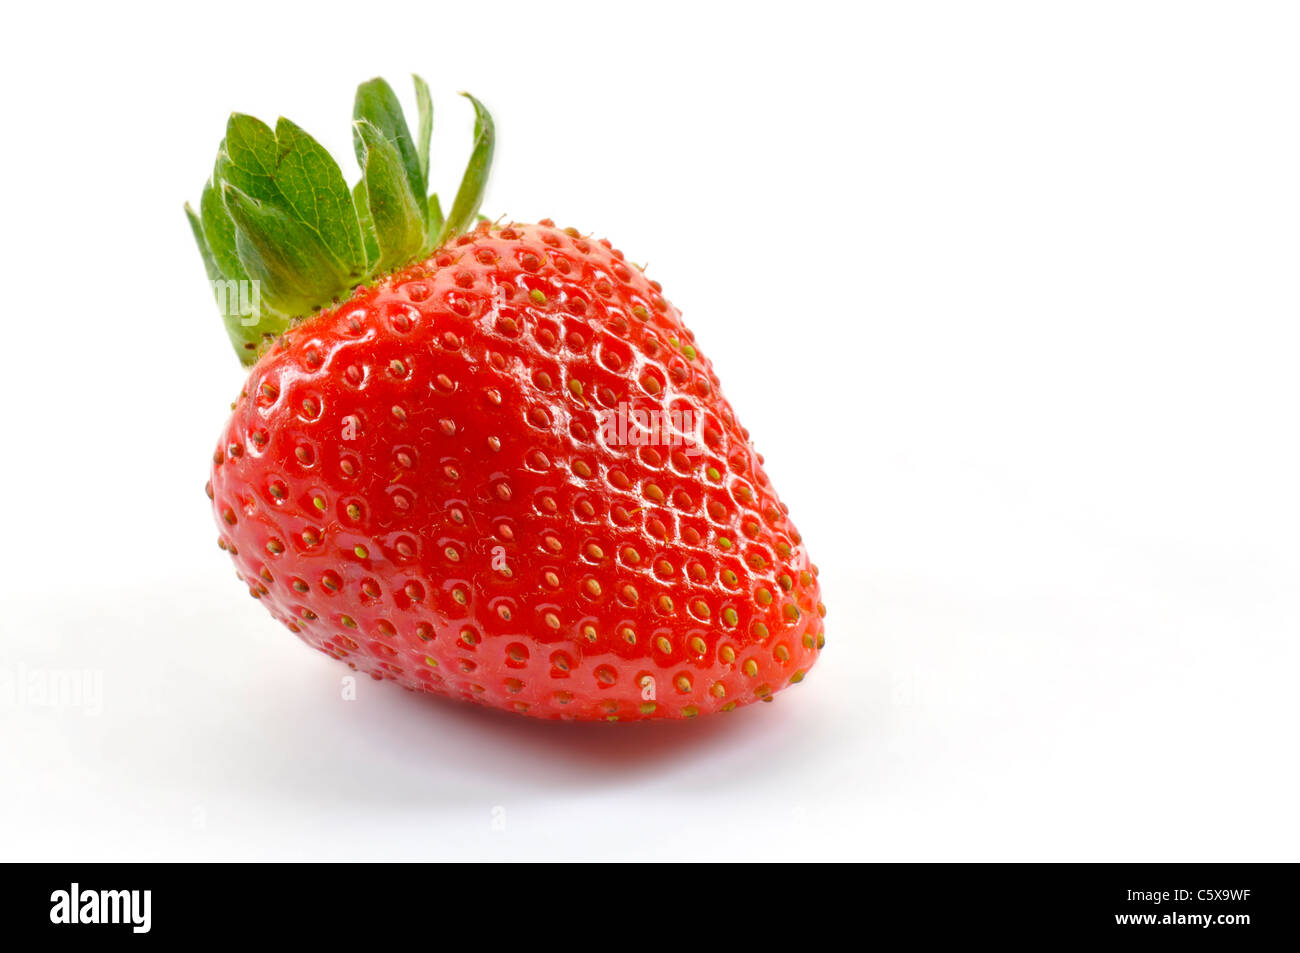 A nice strawberry on a white background Stock Photo